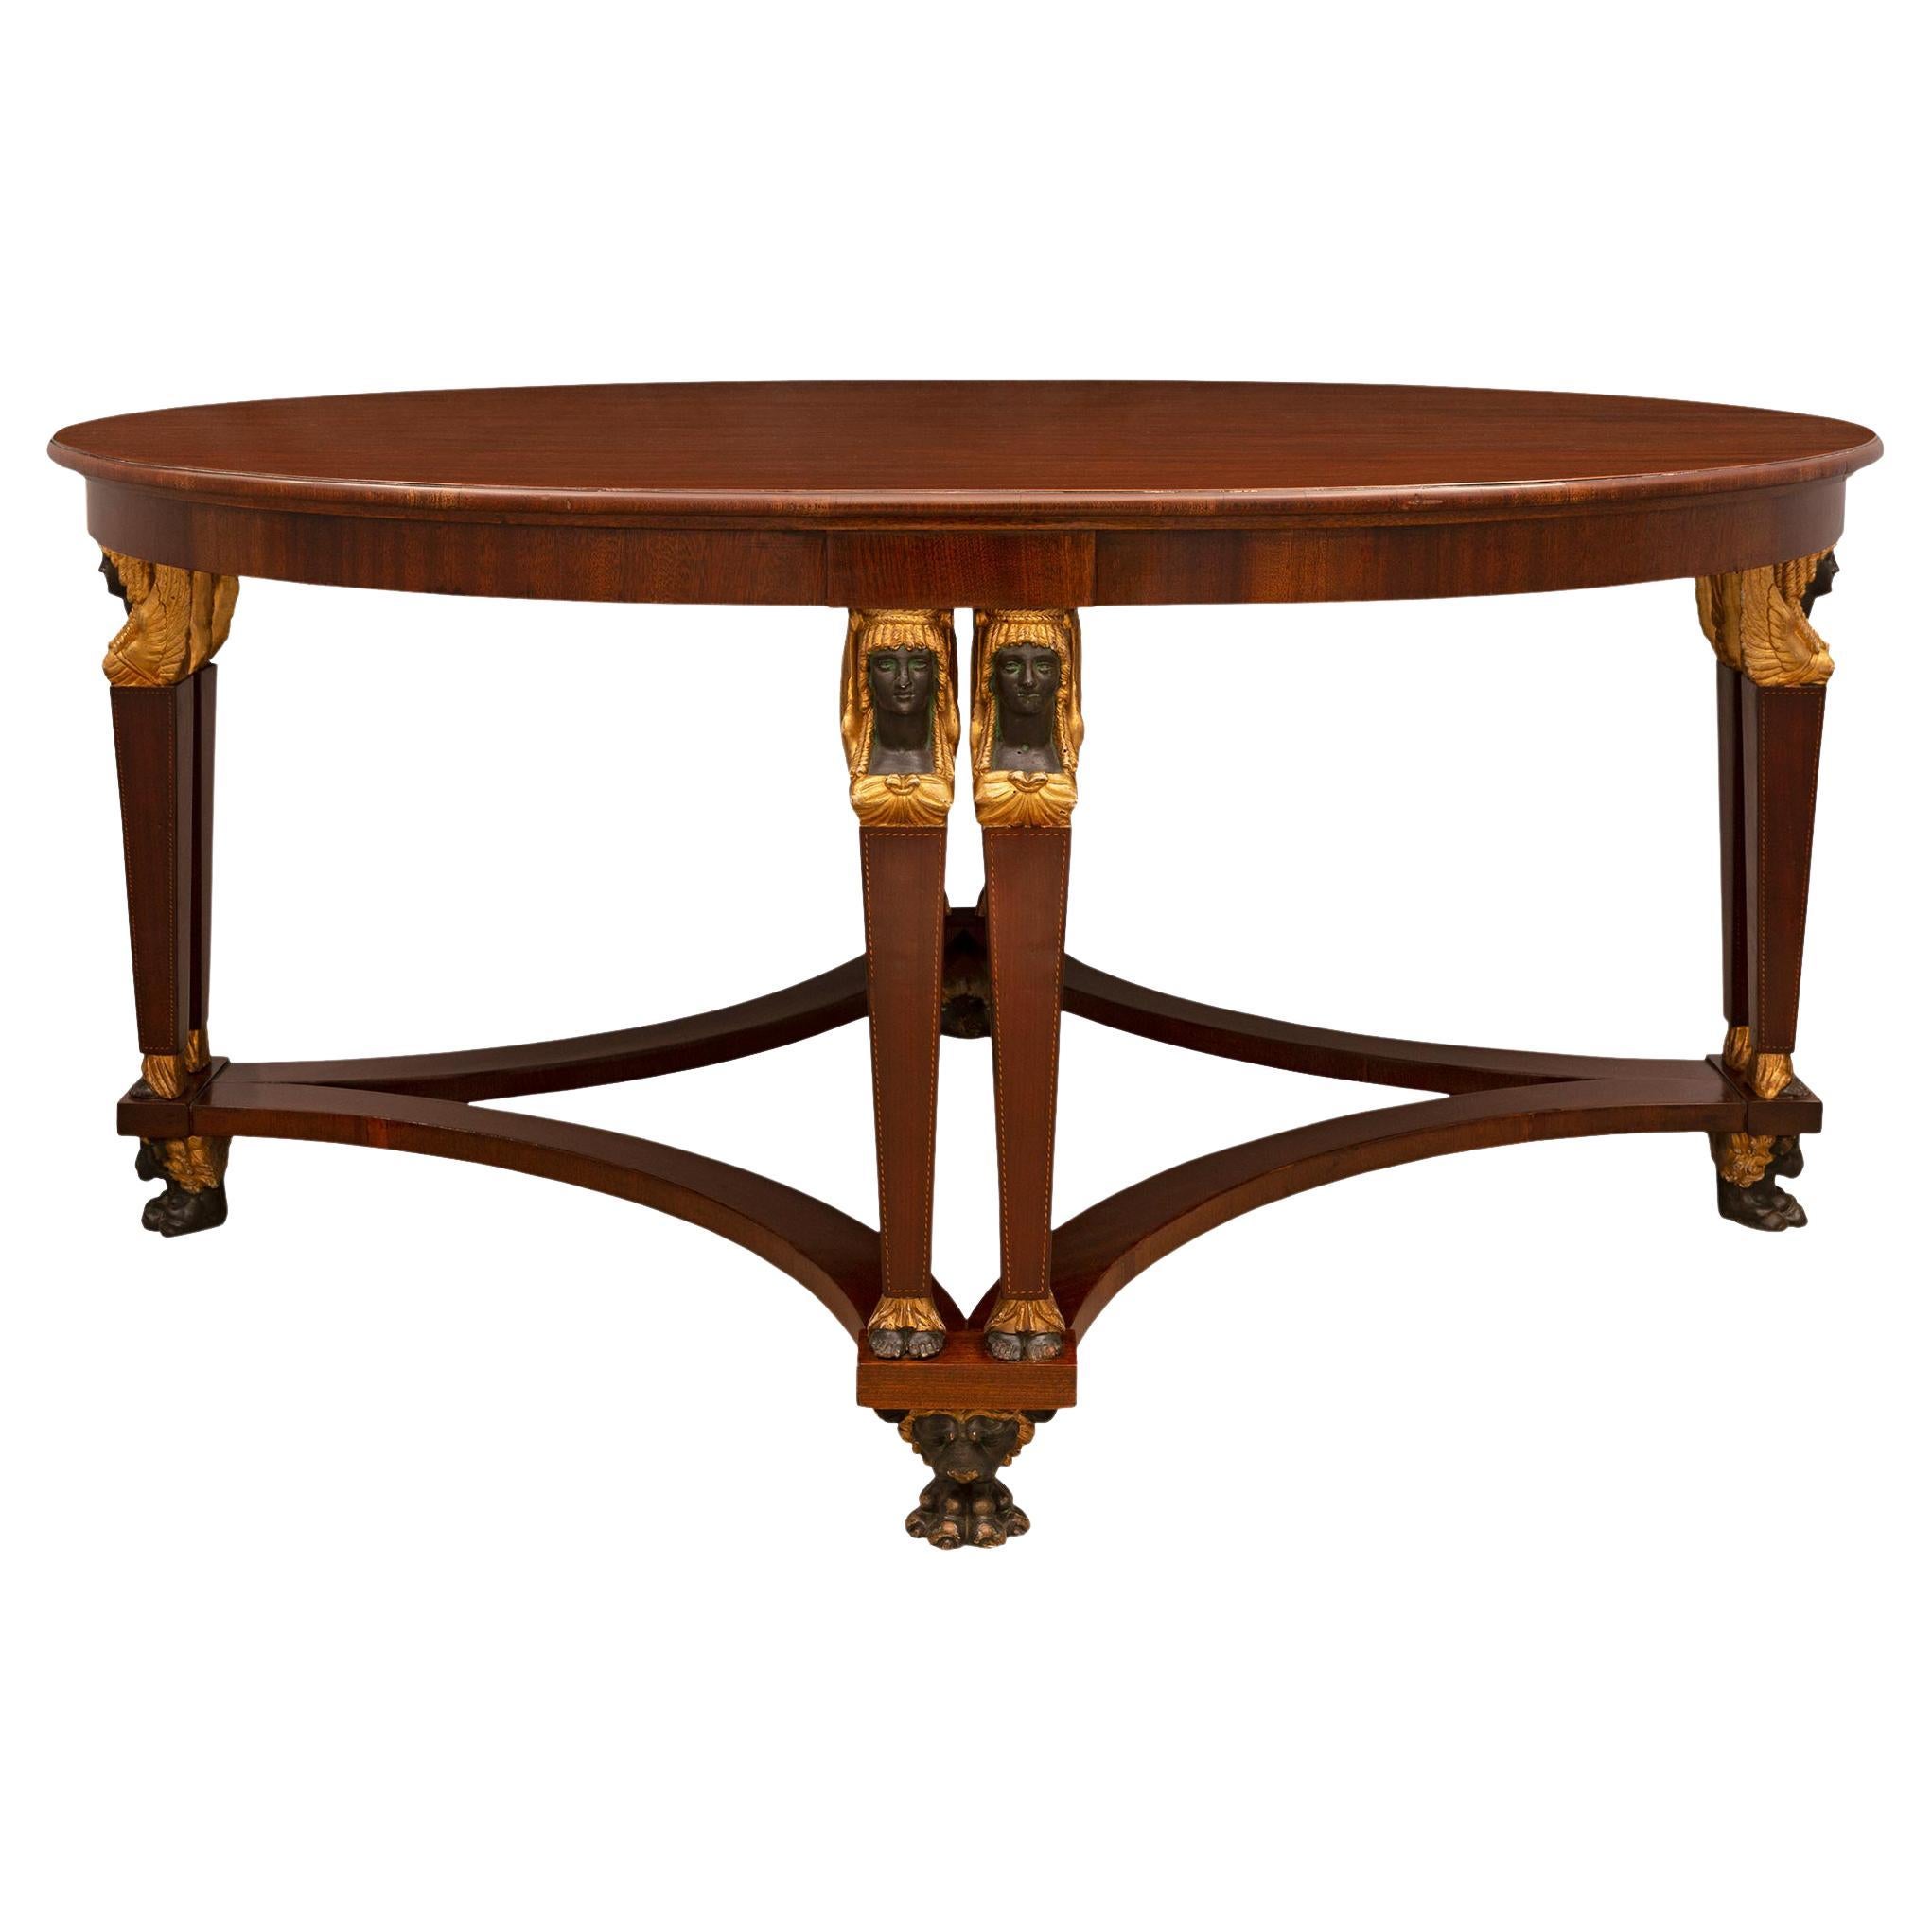 Italian 19th Century Empire St. Oval Mahogany, Gilt and Patinated Center Table For Sale